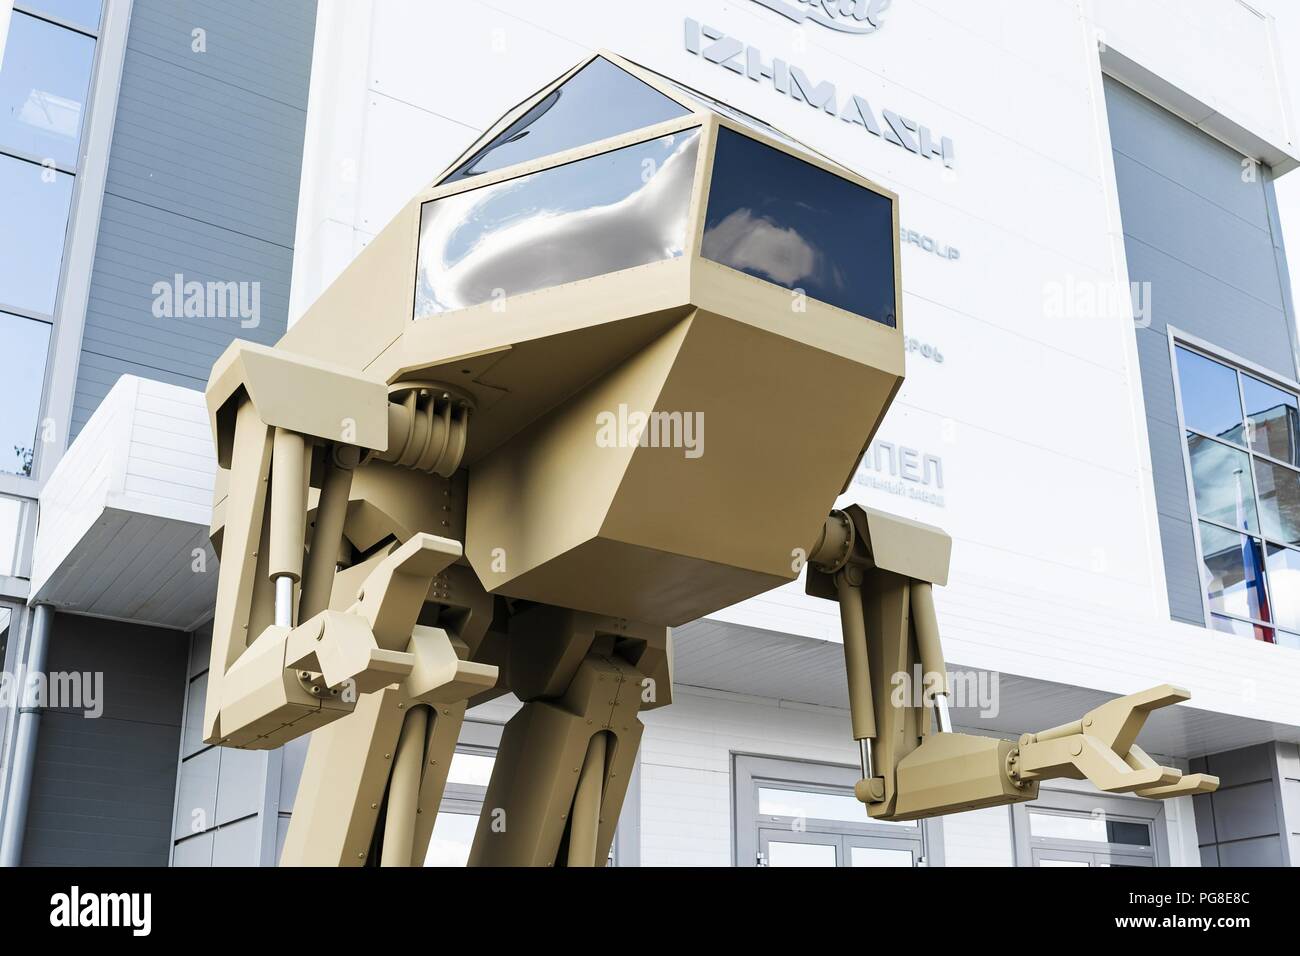 Moscow Region, Russia. 20th Aug, 2018. August 20, 2018. - Russia, Moscow  Region. - A 4.5 tonne pilot-operated walking robot code-named Igoryok  designed by the Kalashnikov Concern is displayed at the Russian